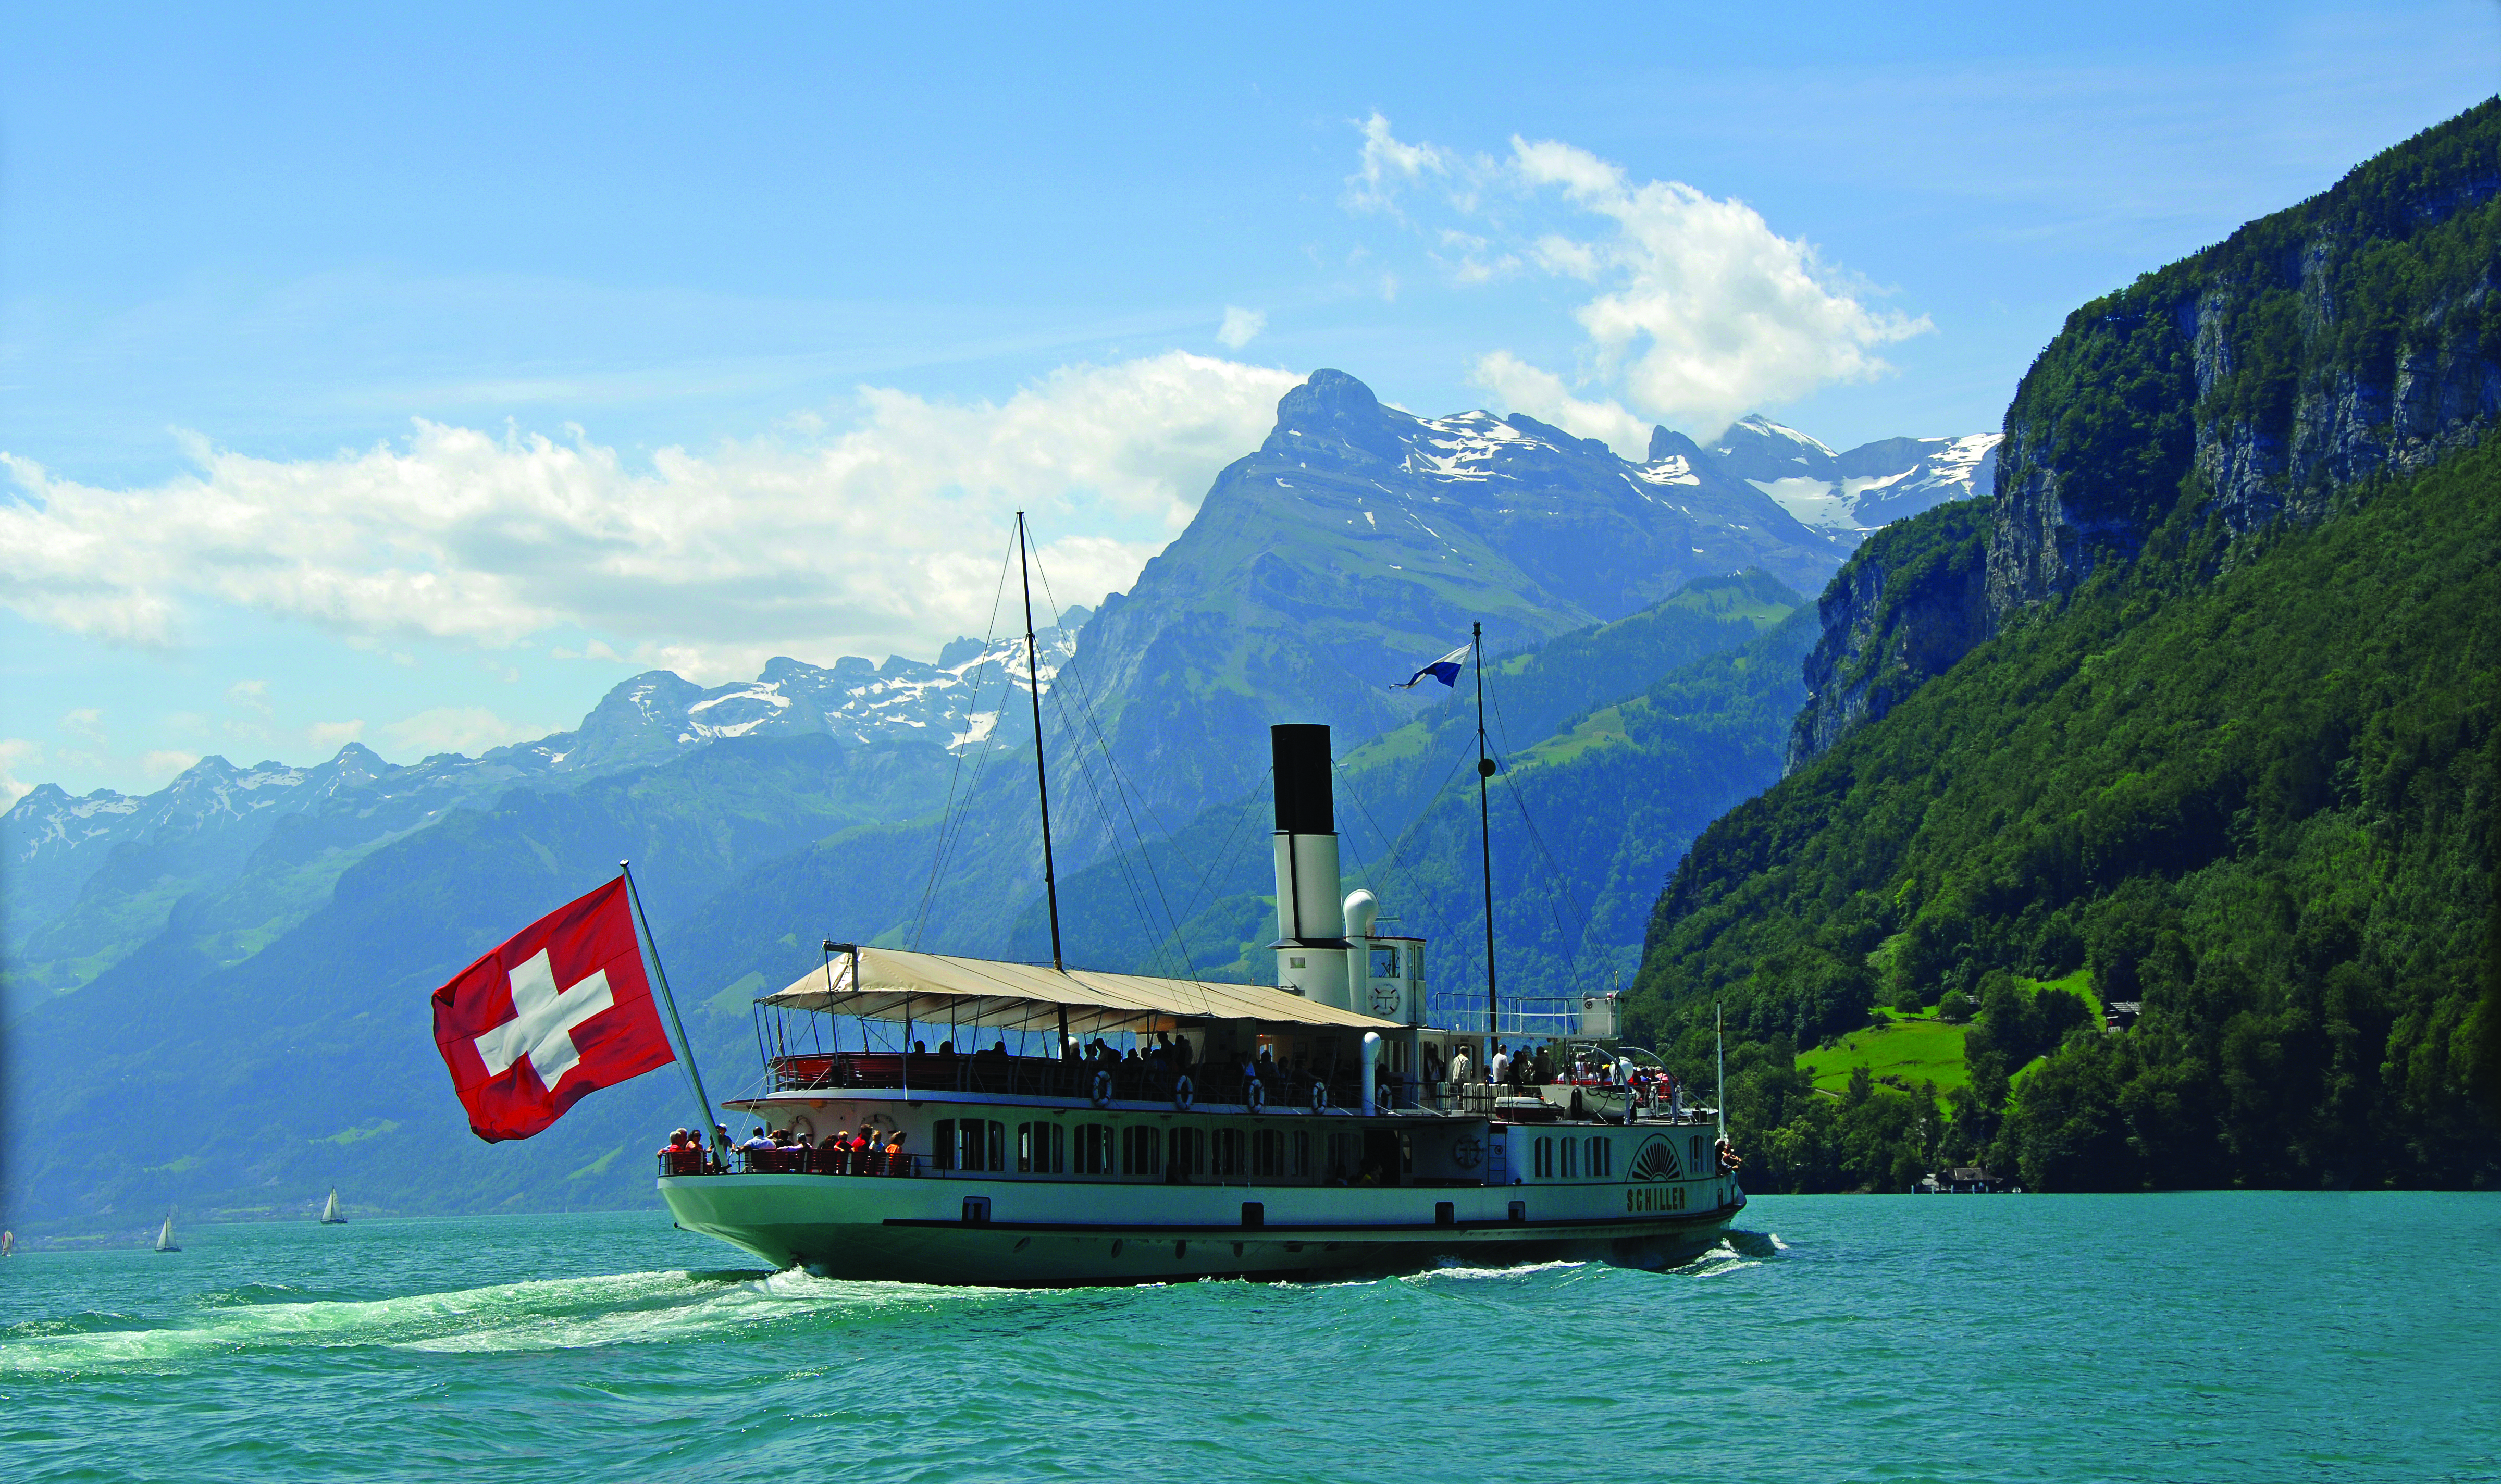 switzerland and germany tours